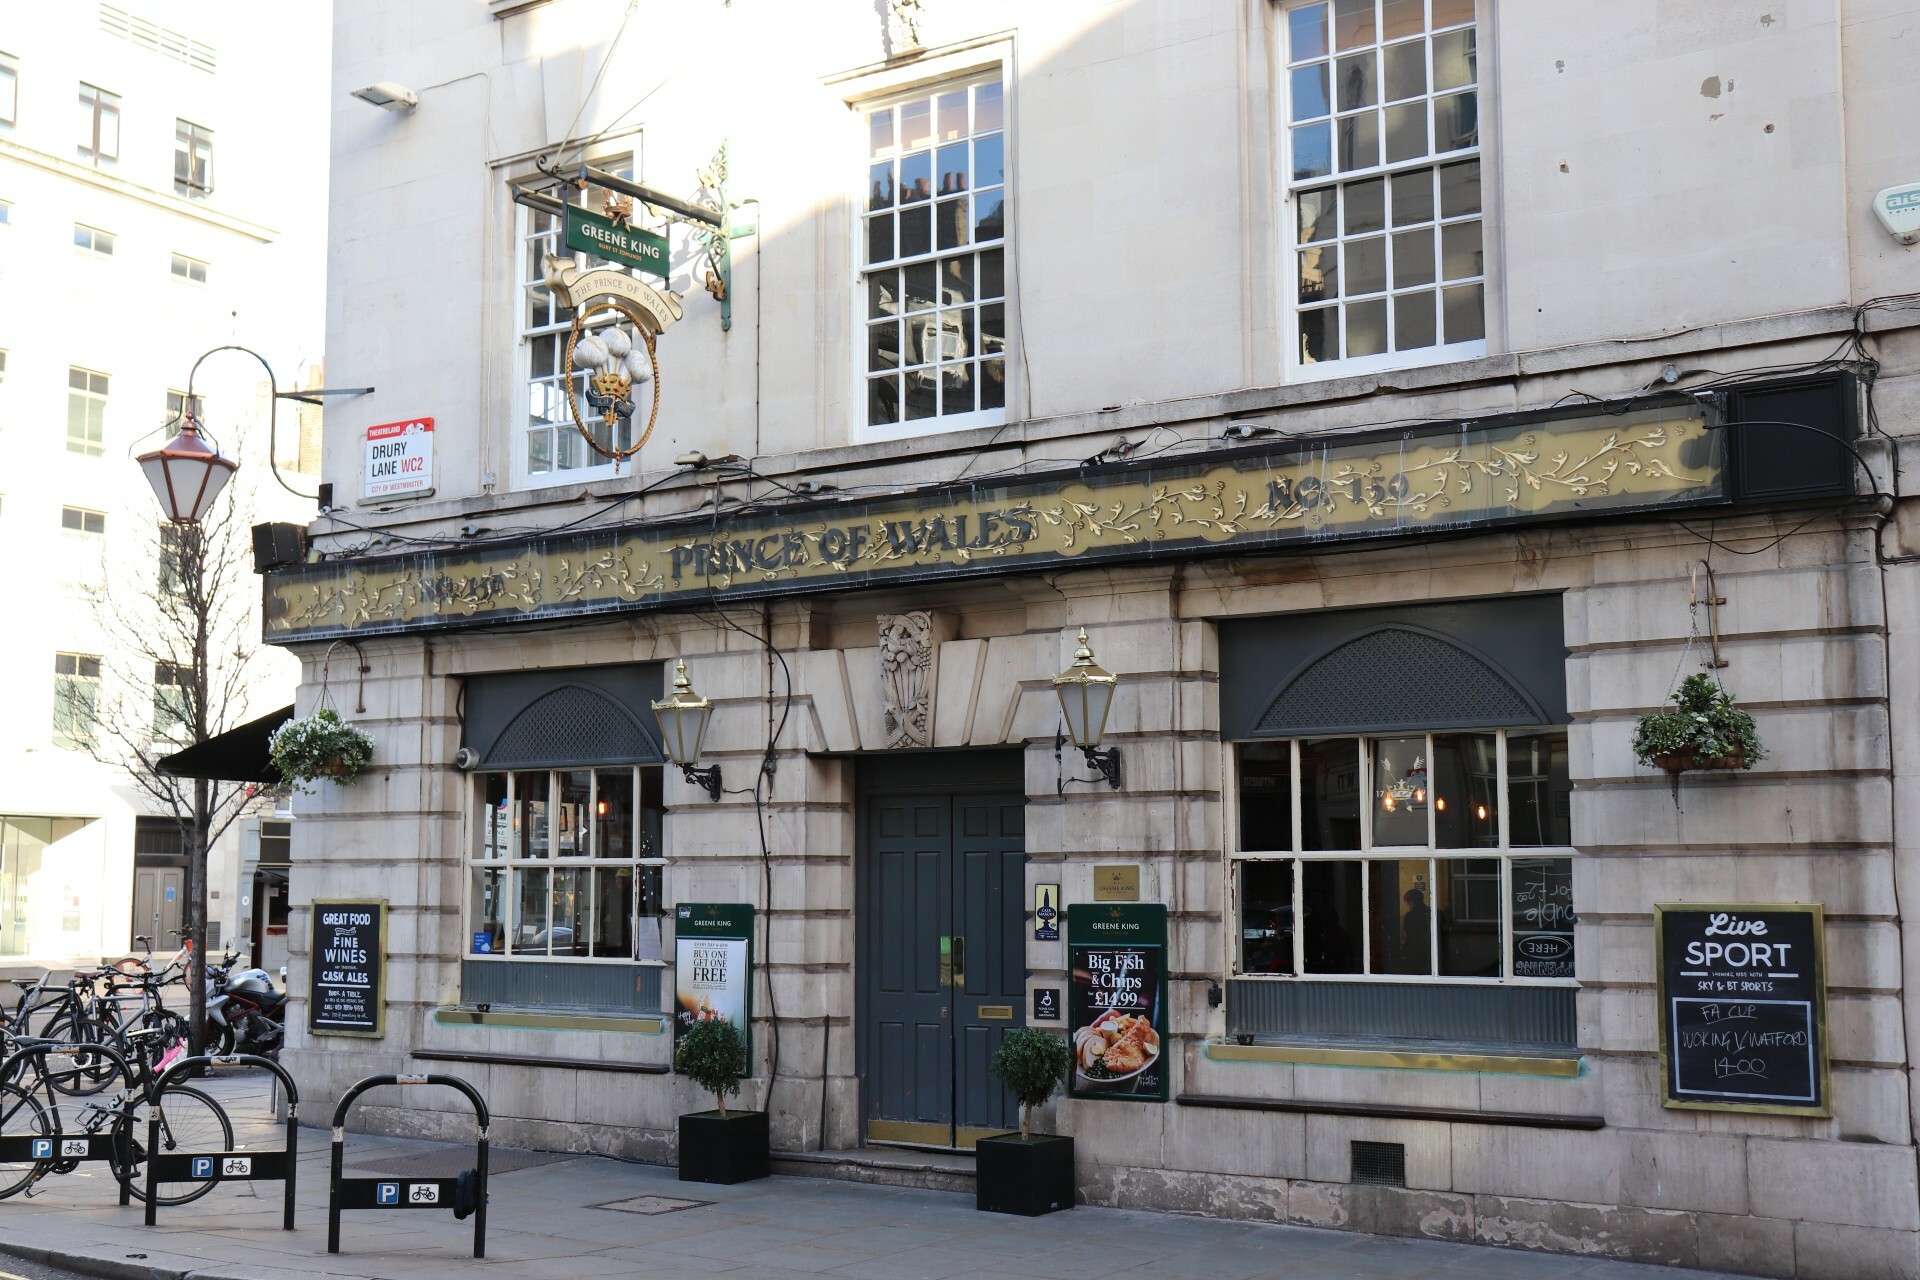 For sale: a 170-year-old pub in Covent Garden